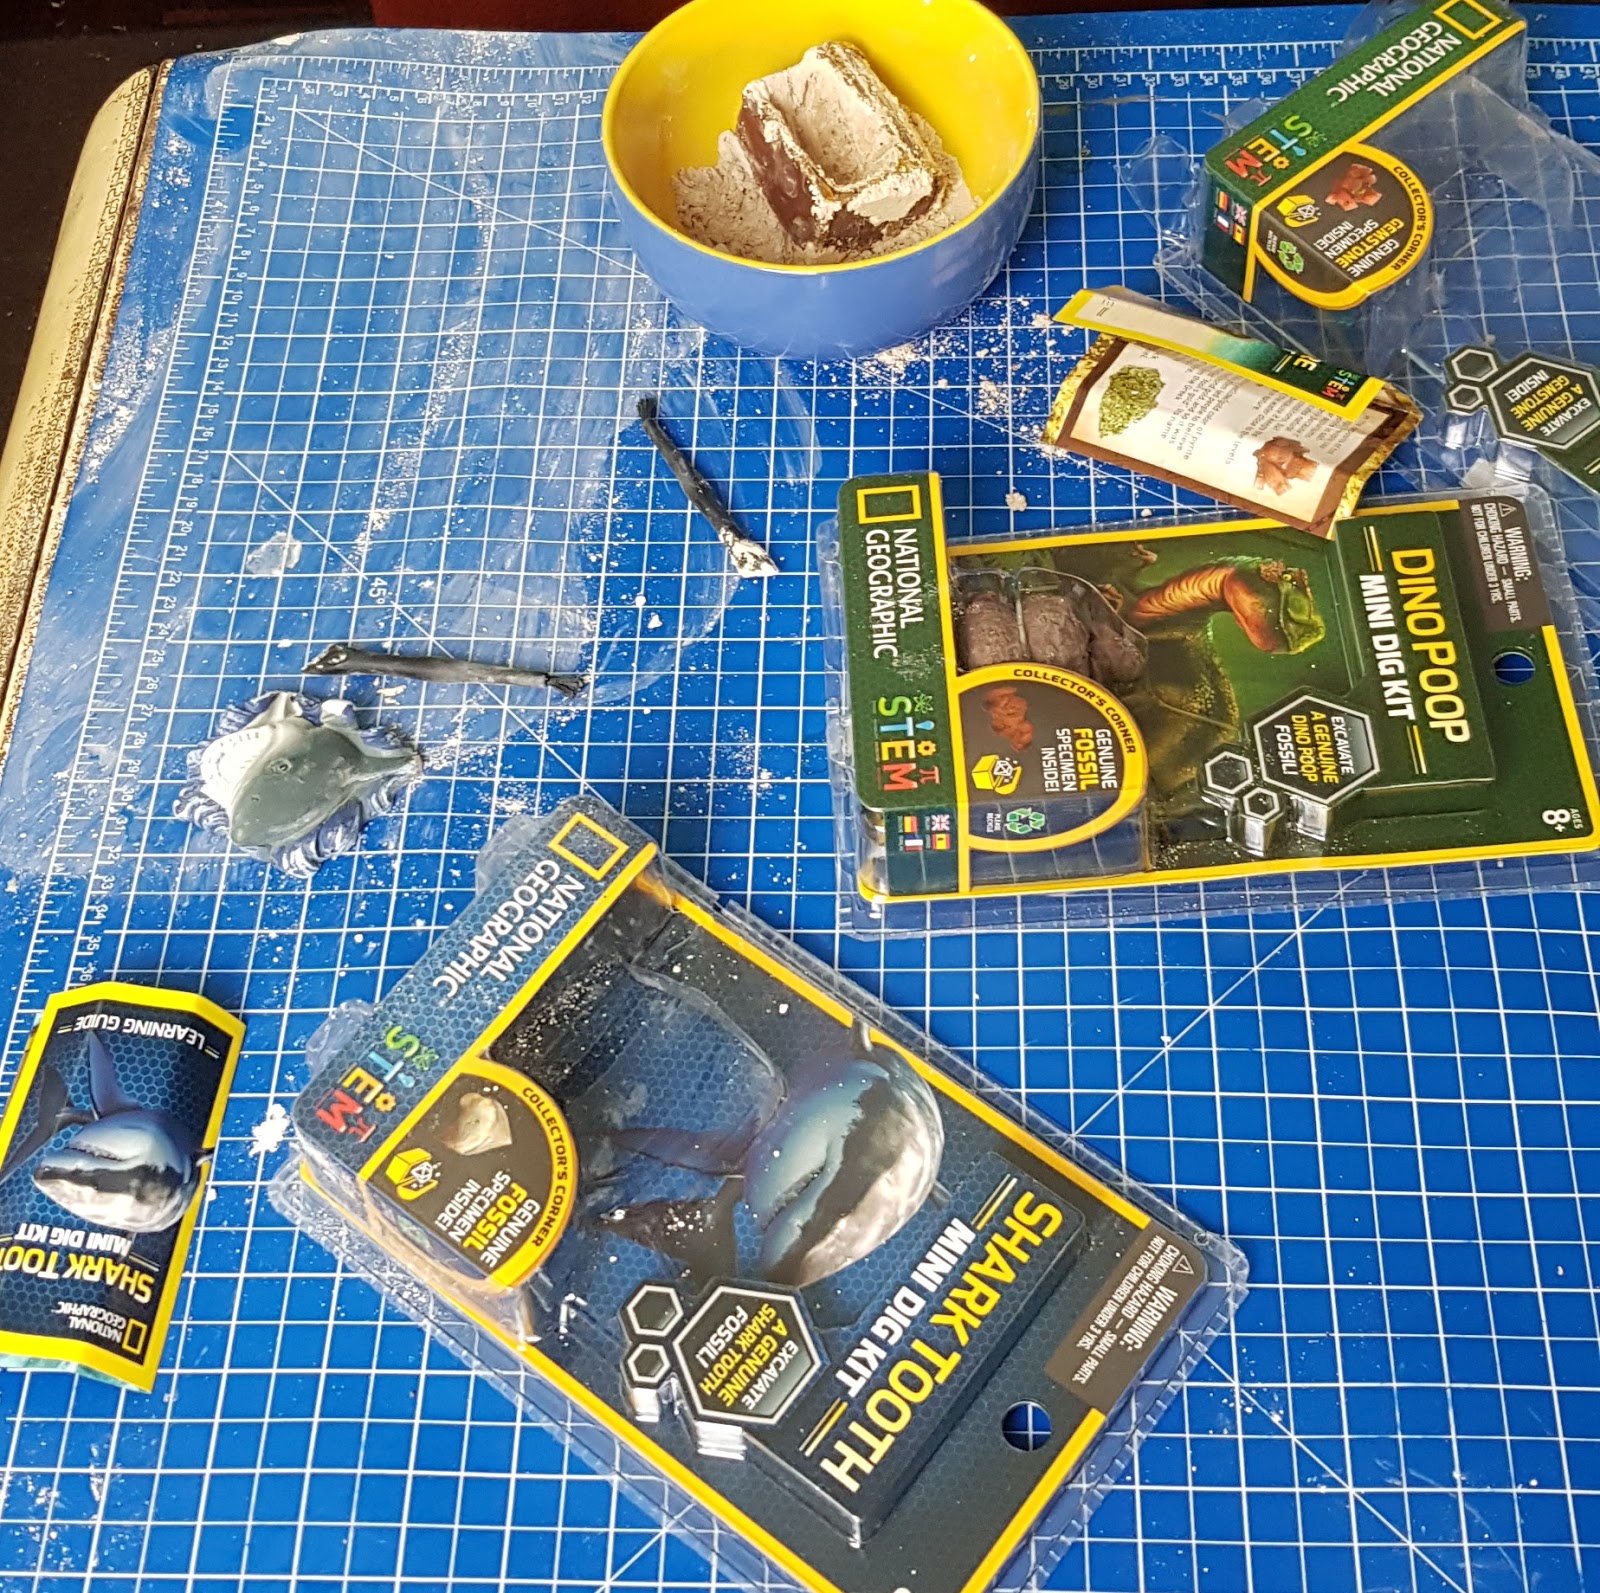 The Brick Castle: National Geographic STEM Dig Kits Review (age 8+) Sent by  Bandai.